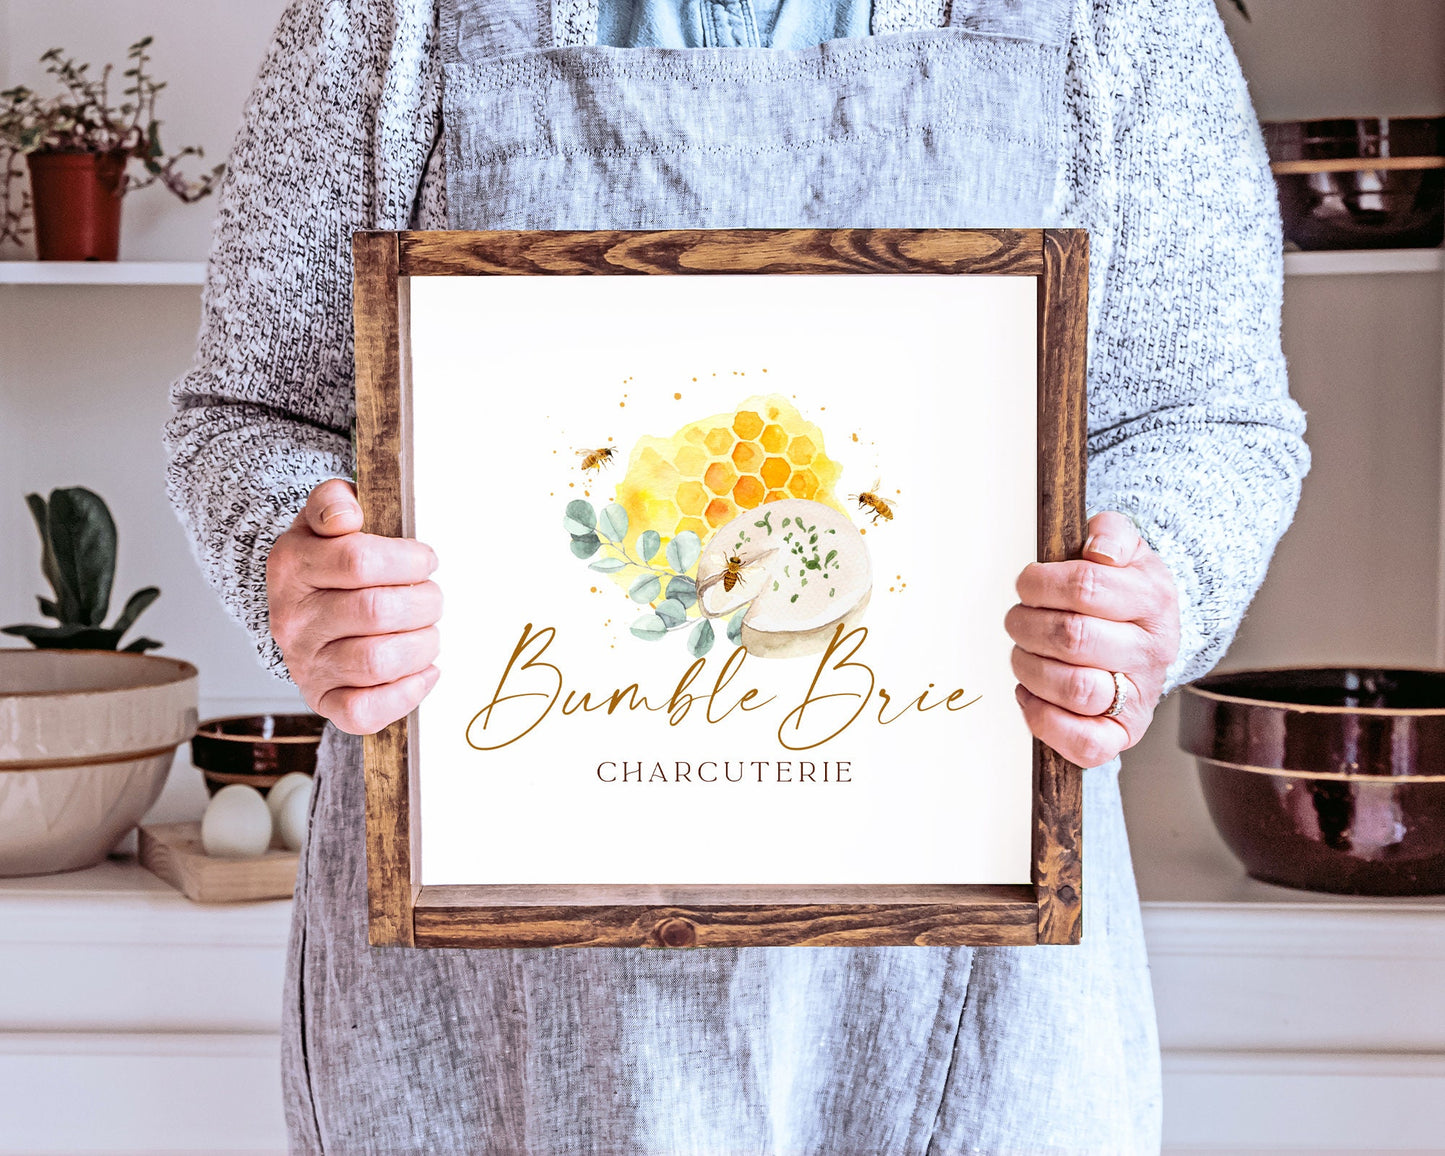 Bumble Brie | Premade Logo Design | Charcuterie, Cheese Board, Bee, Honey